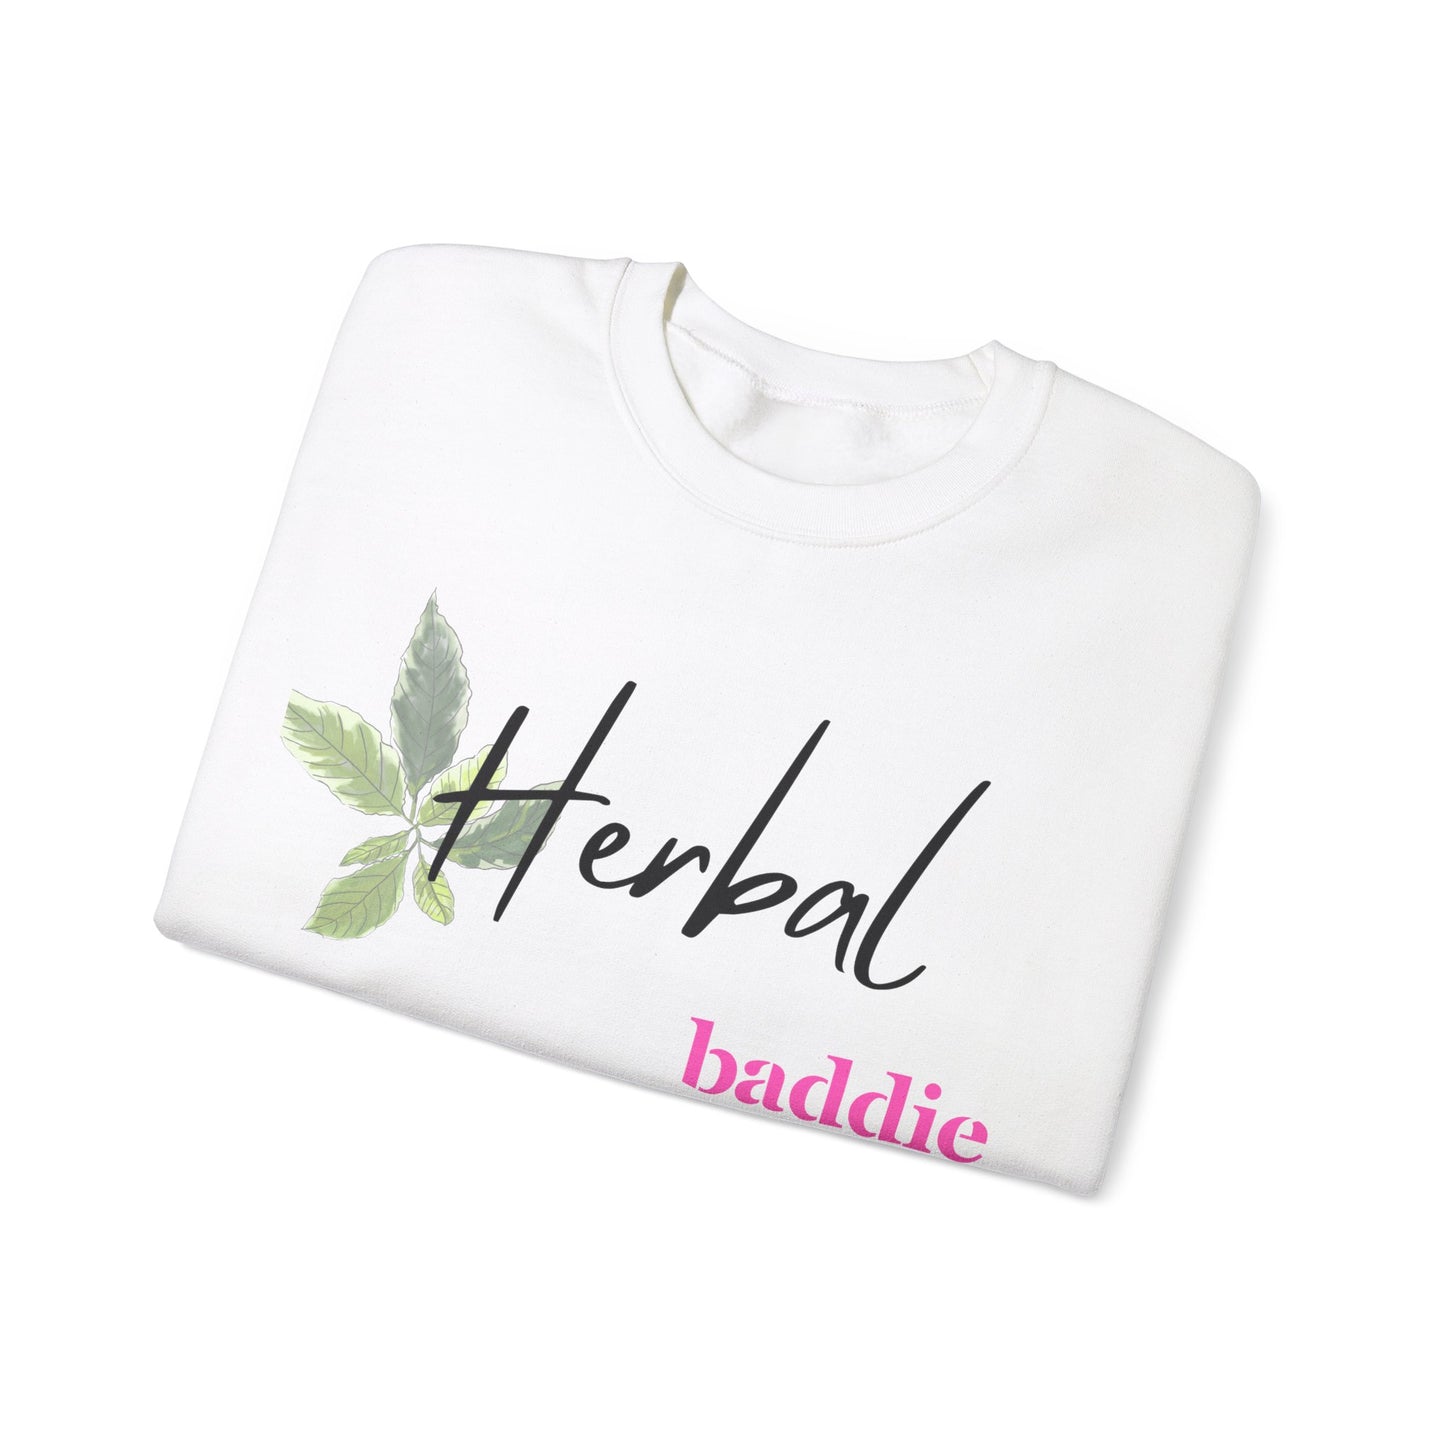 "It Girl Collection" Herbal Baddie - White